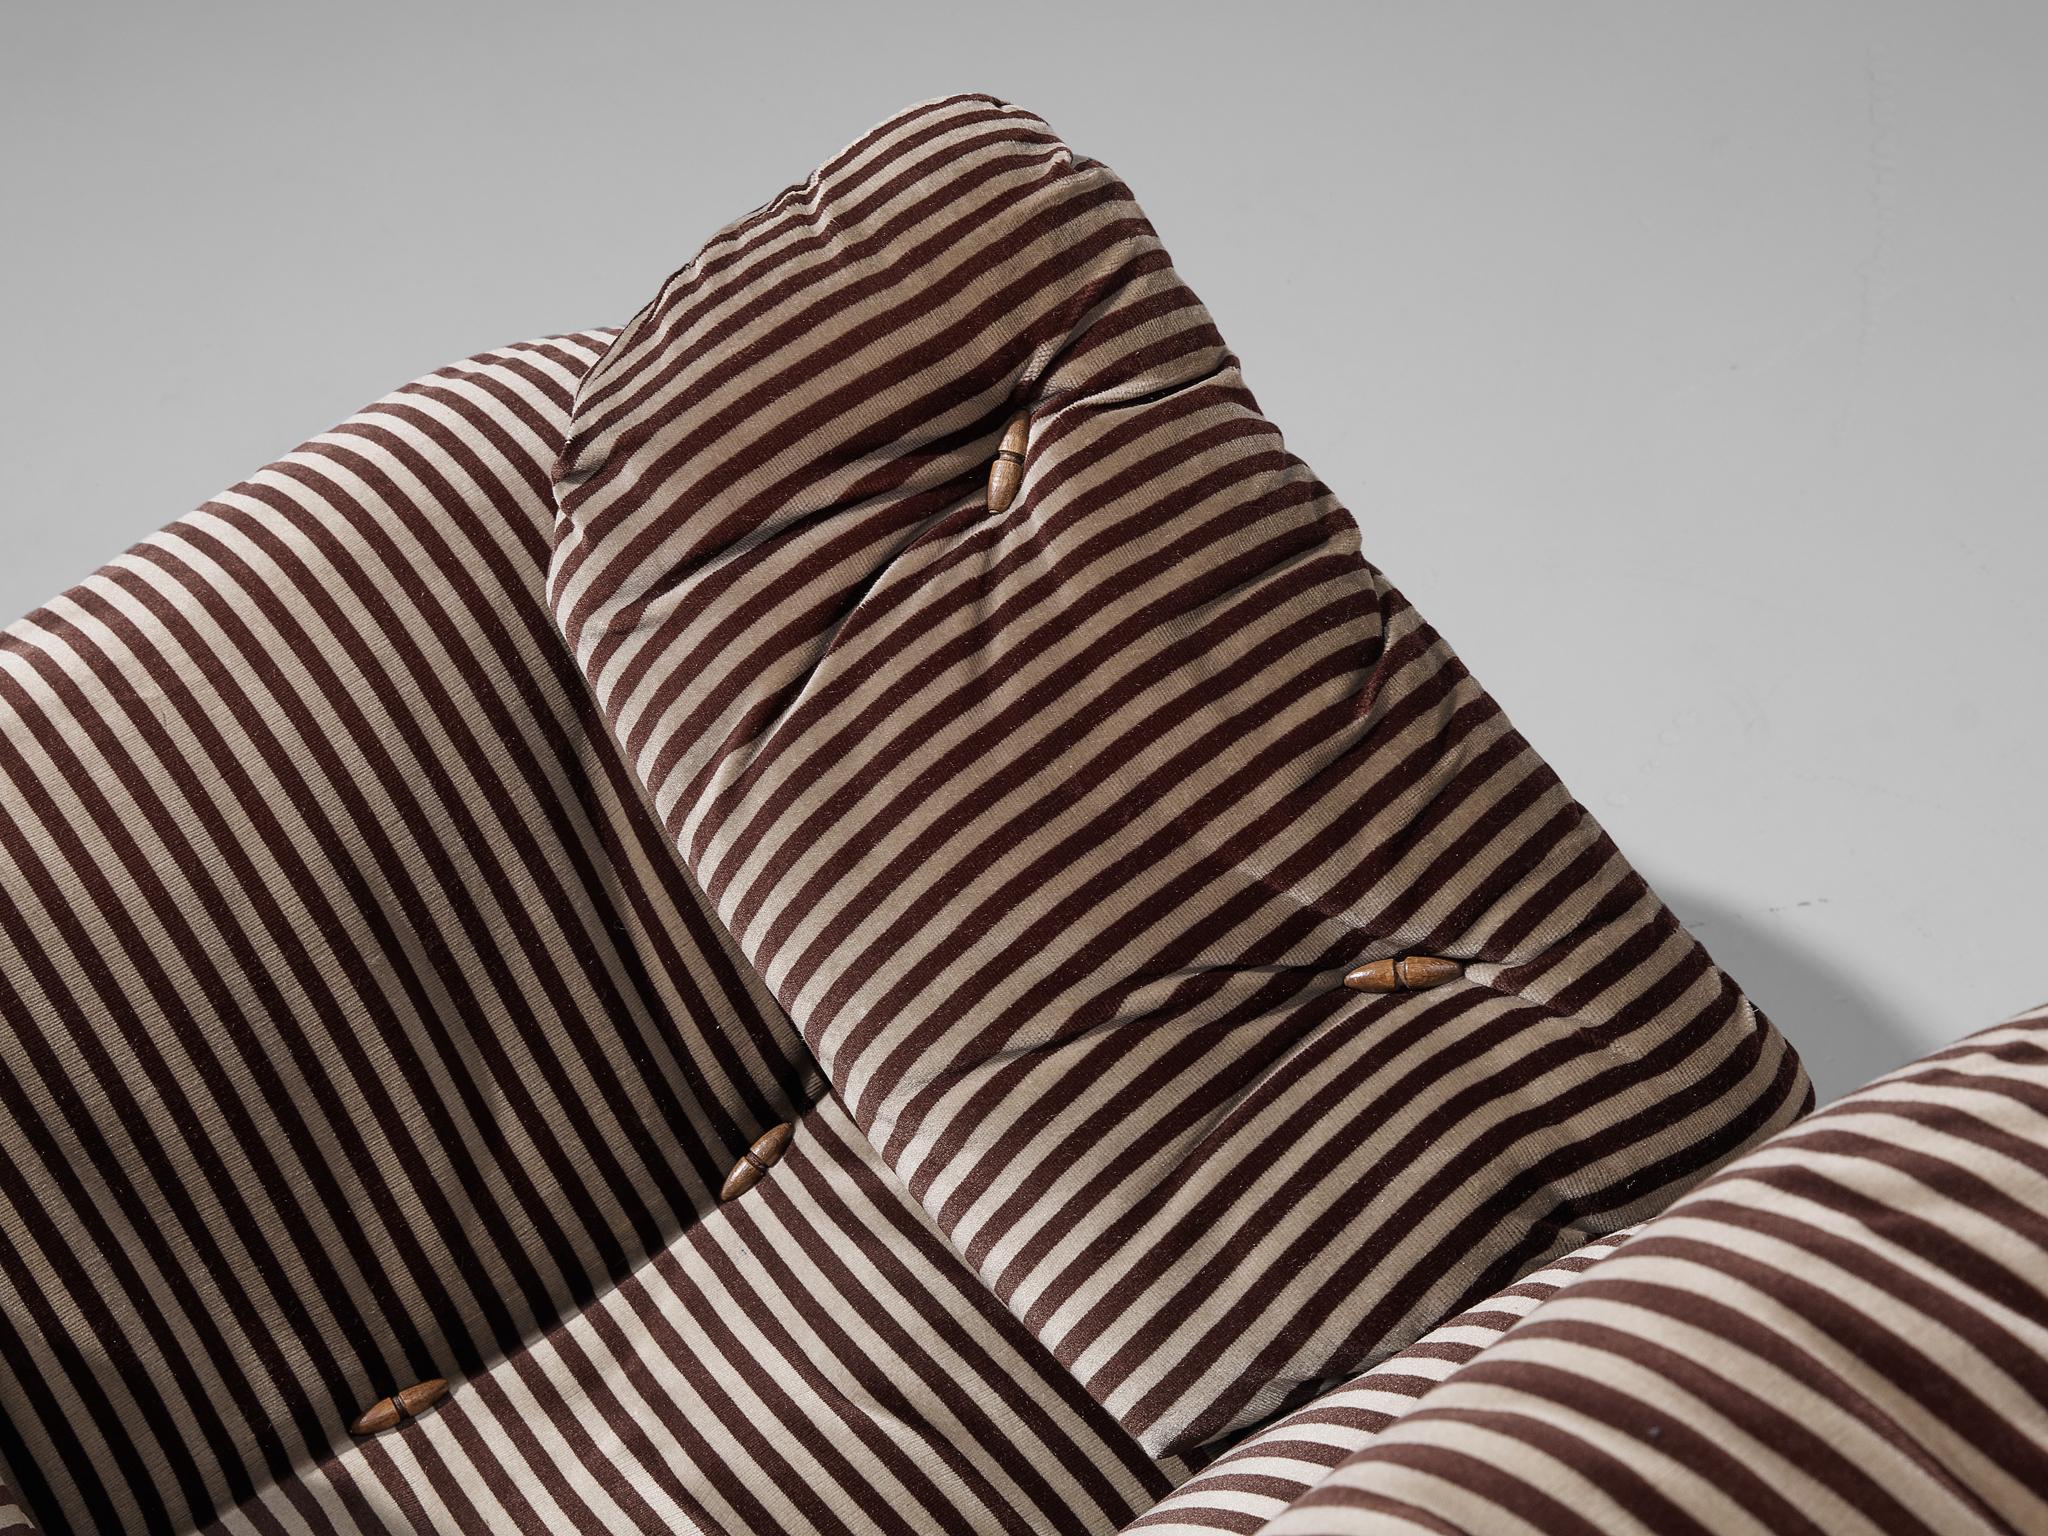 E. Cobianchi for Insa Lounge Chair in Striped Upholstery In Good Condition For Sale In Waalwijk, NL